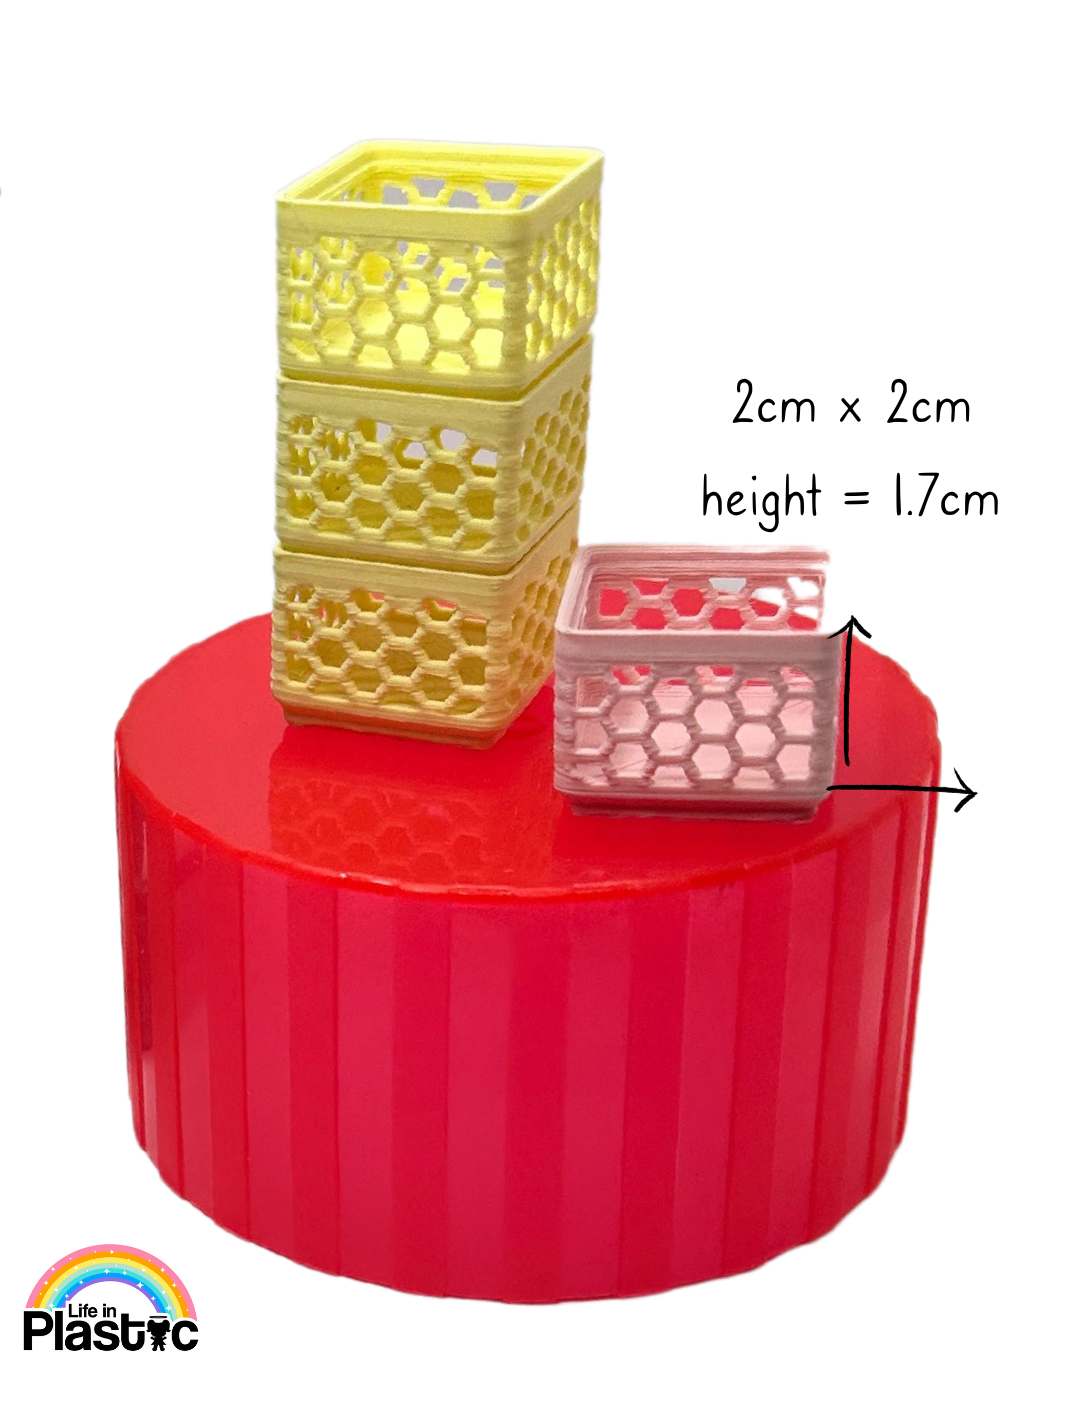 Miniature Doll House Stacking Baskets